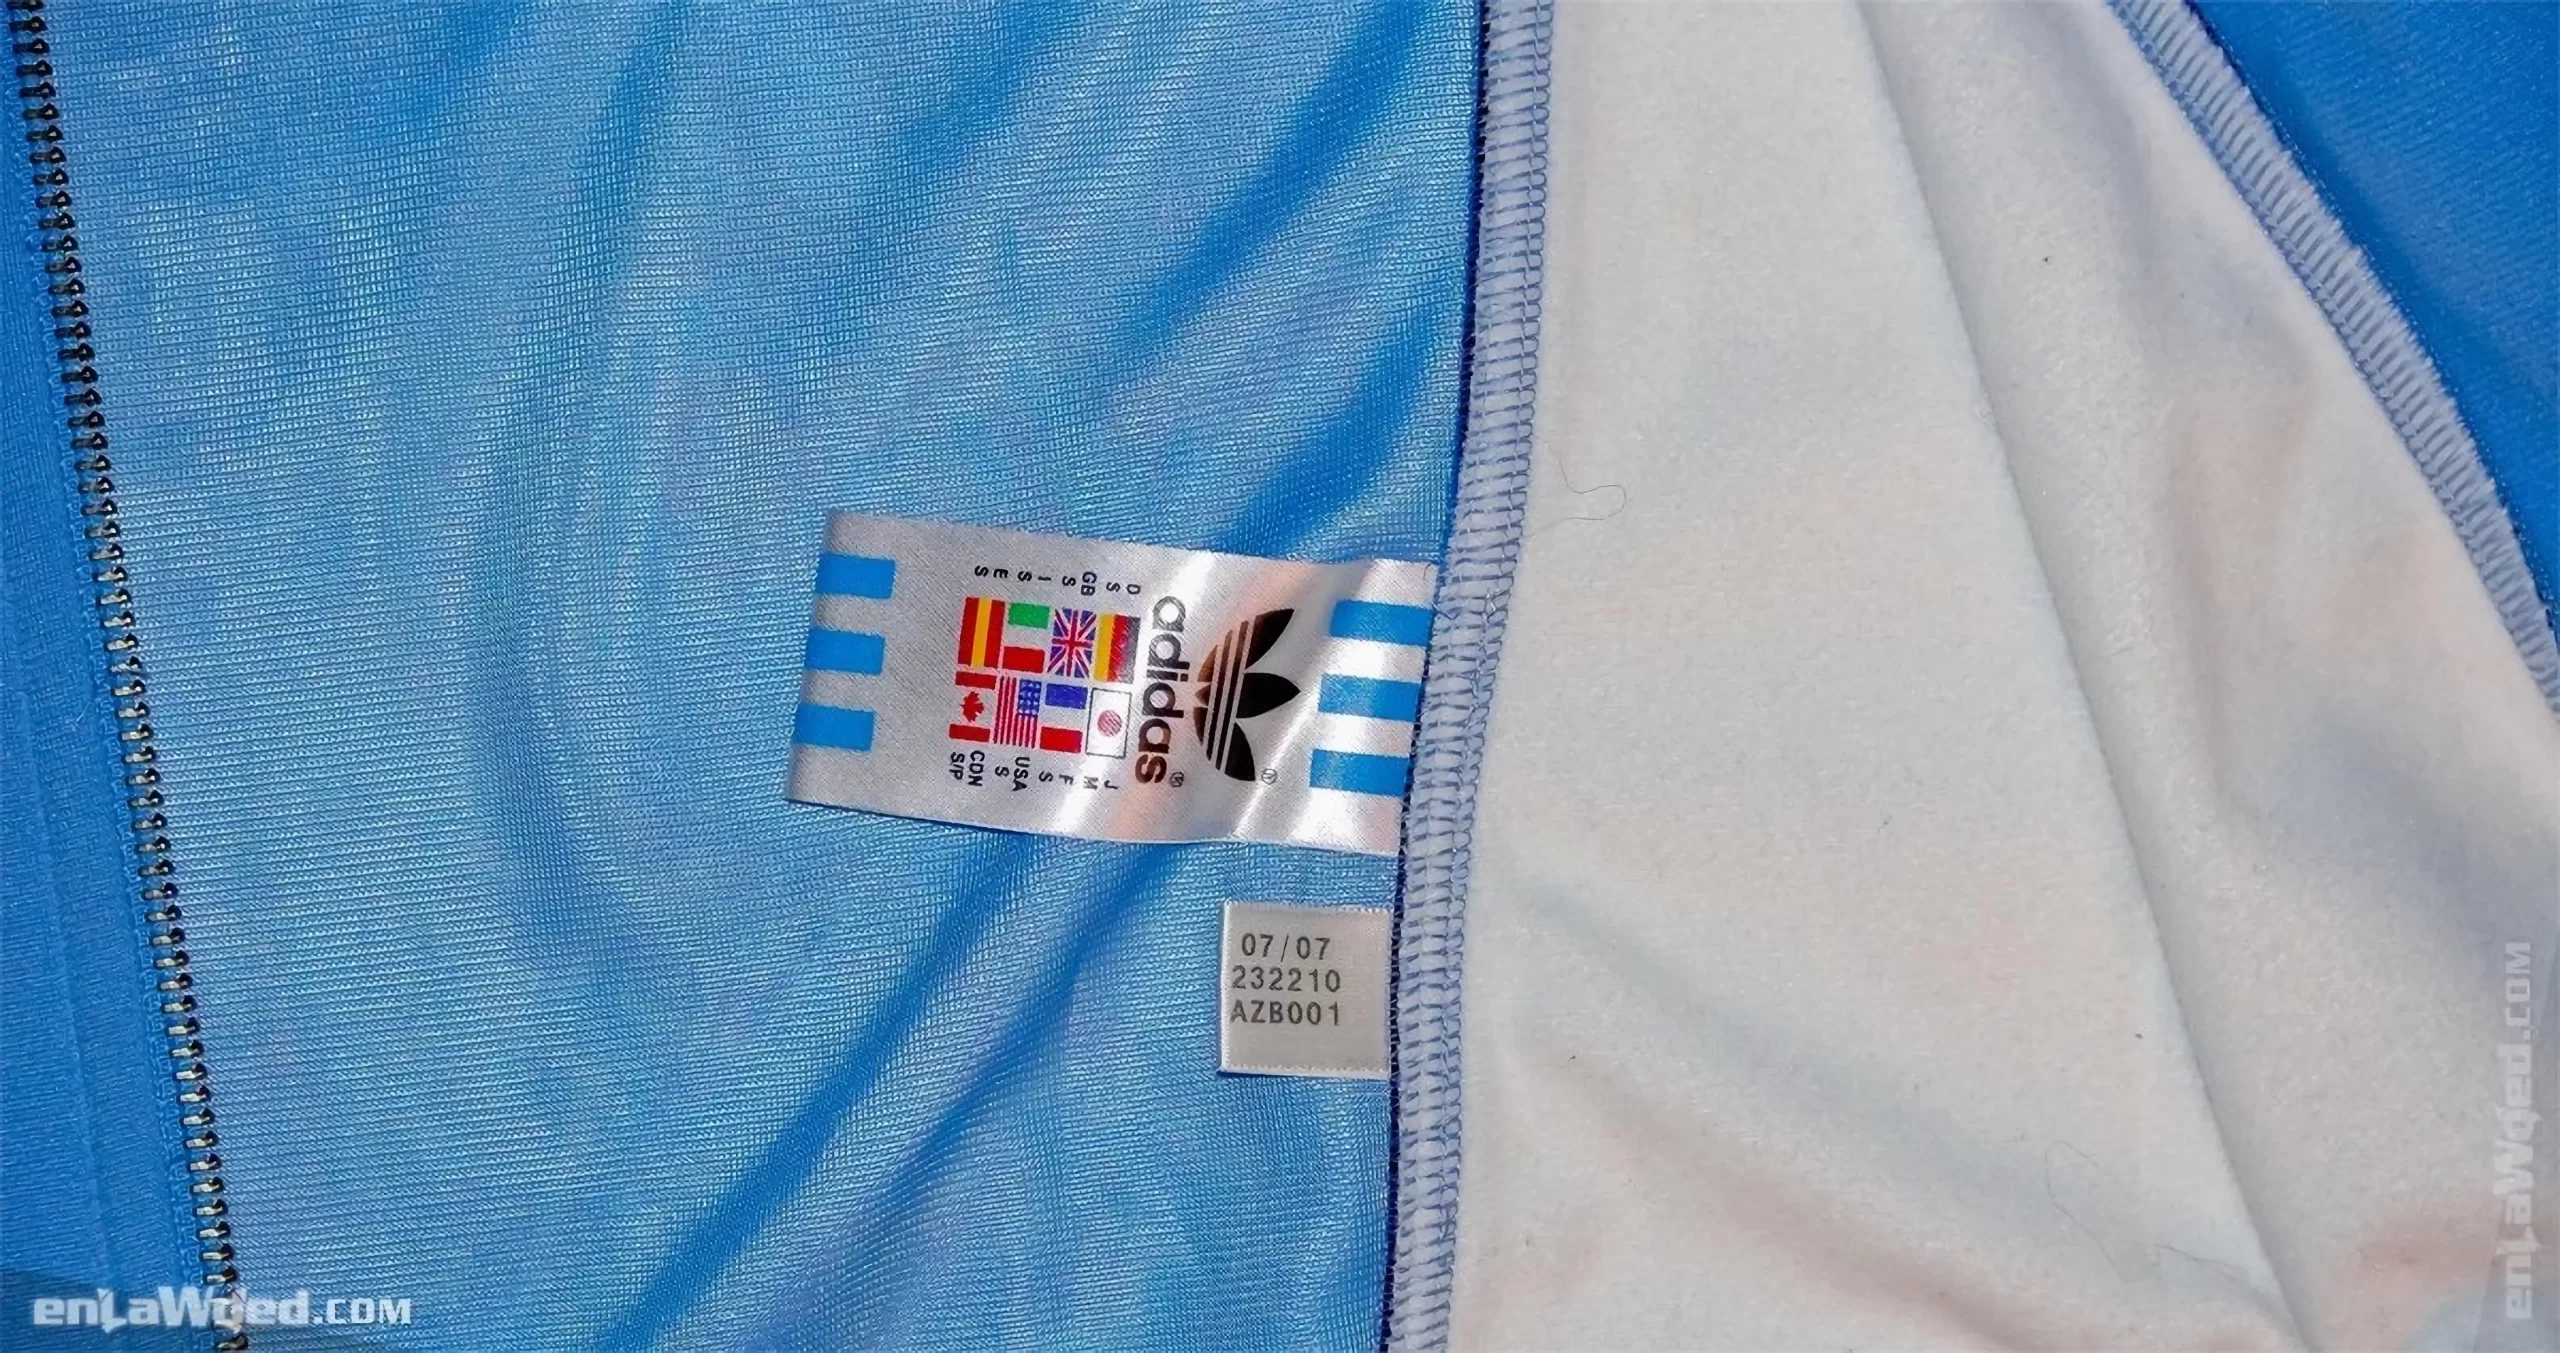 Adidas tag of the Philadelphia jacket, with the month and year of fabrication: 07/2007